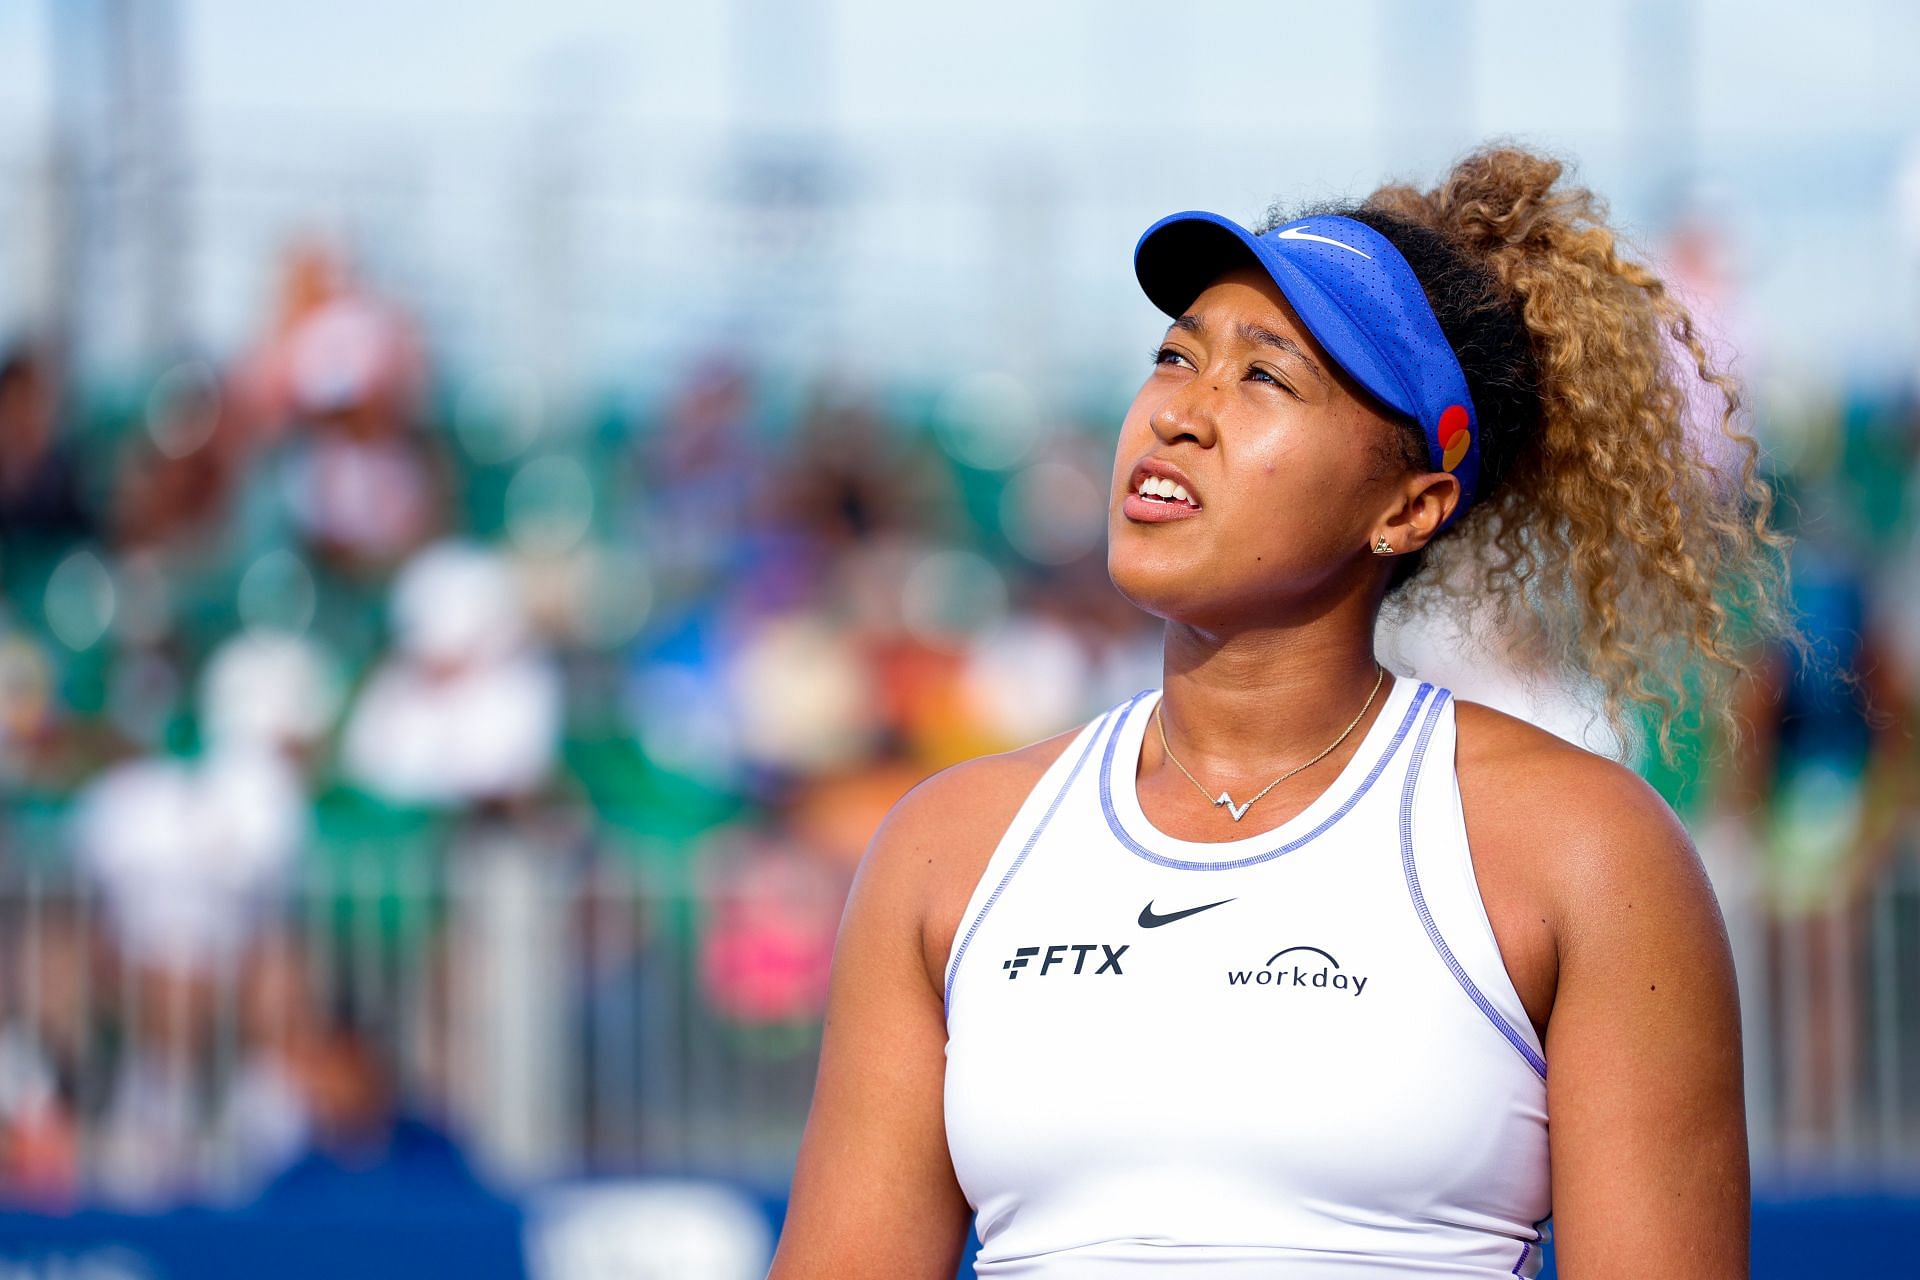 In Case You Missed It: Naomi Osaka For The Nike Tech Campaign, The Real  Housewives Of Atlanta Take On The Renaissance Tour, And More